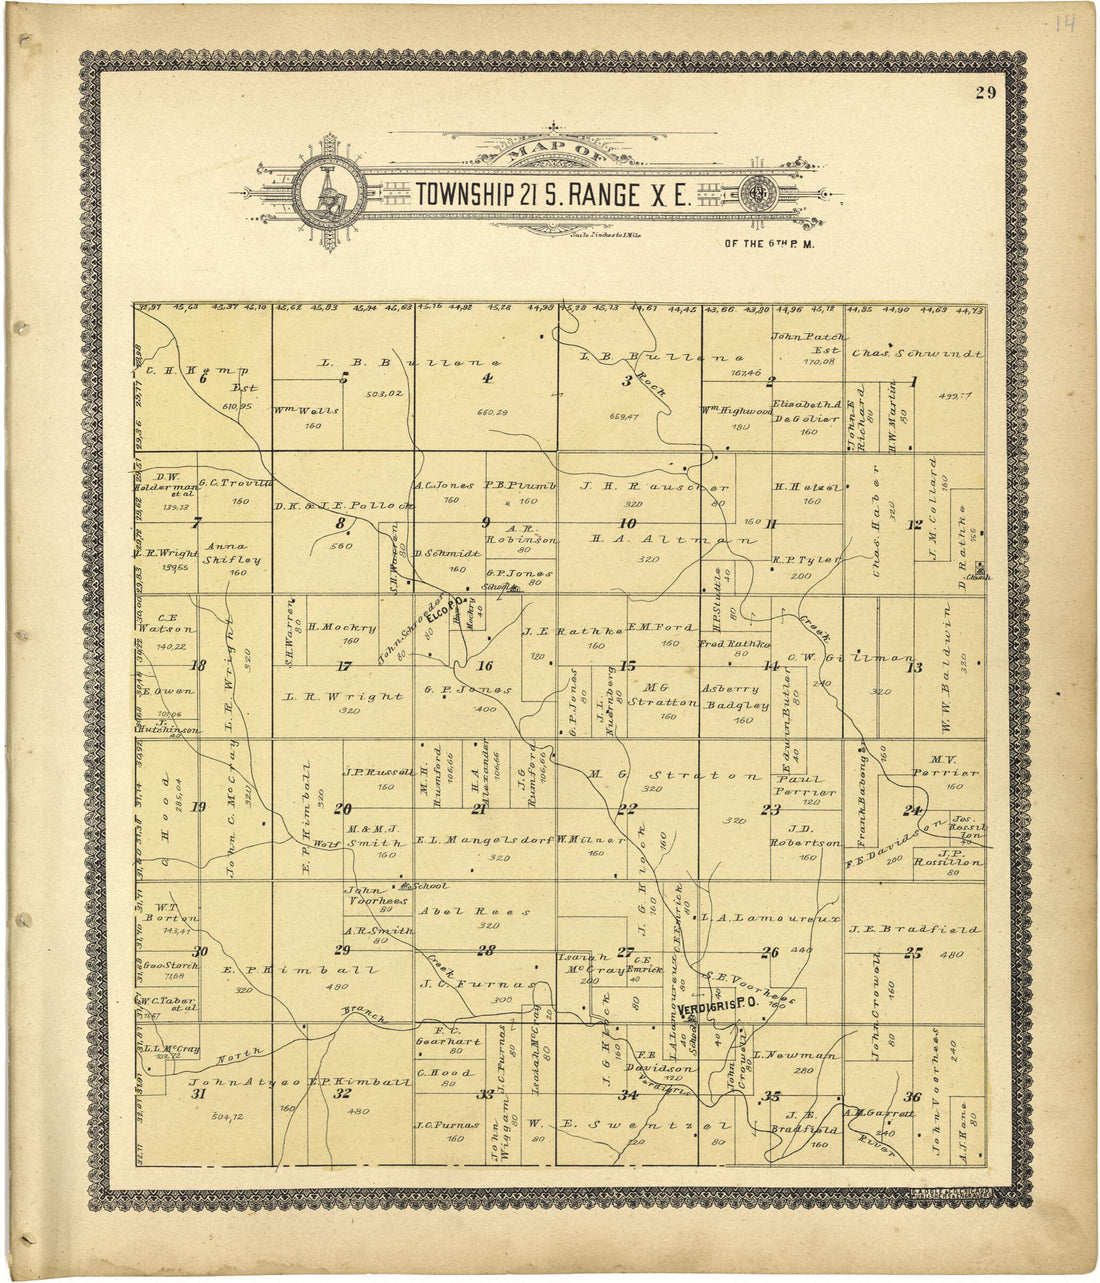 This old map of Map of Township 21 S. Range X E. from Standard Atlas of Lyon County, Kansas from 1901 was created by  Geo. A. Ogle &amp; Co in 1901